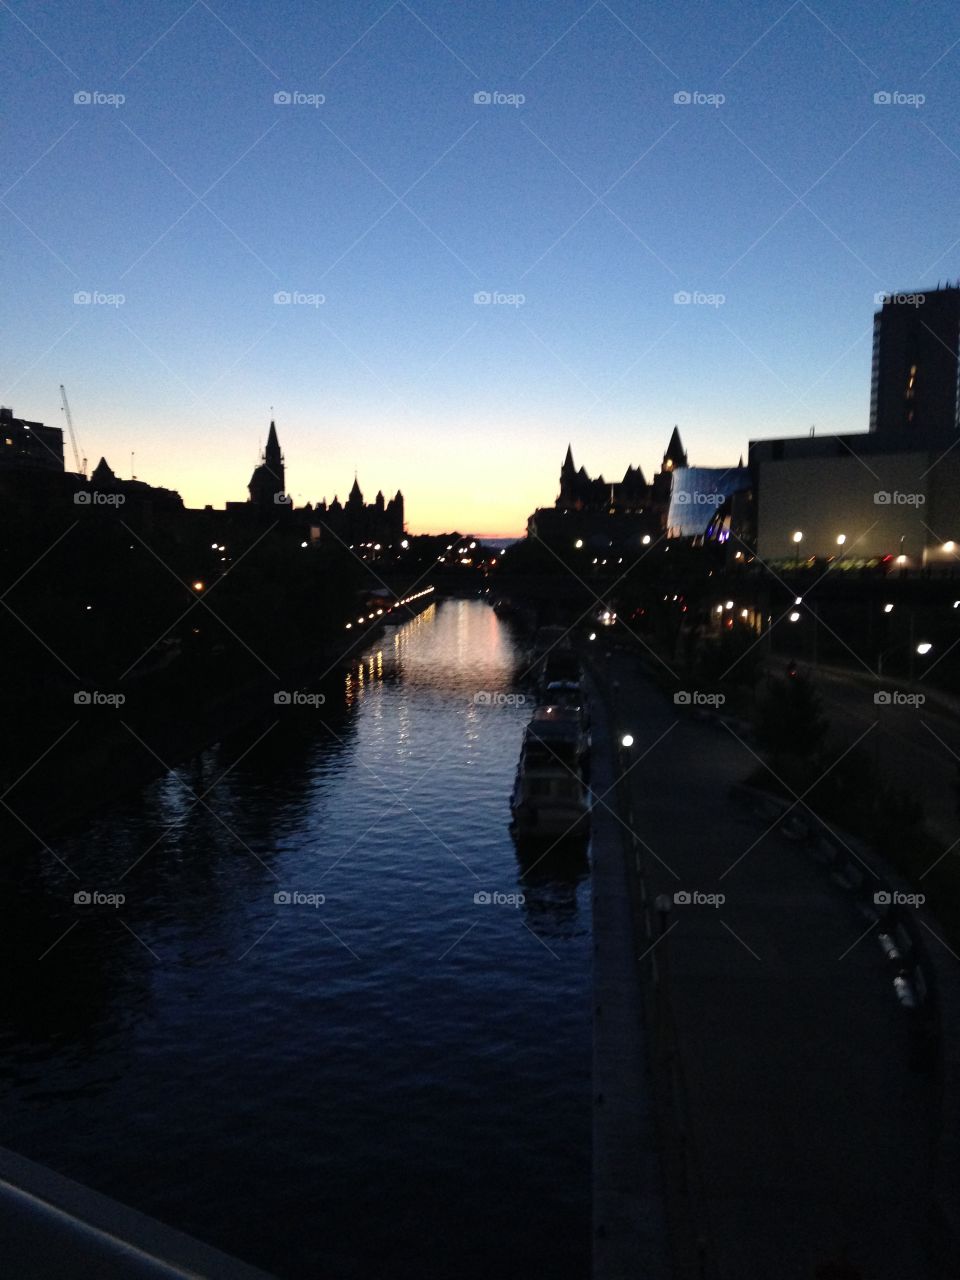 The Rideau Canal 